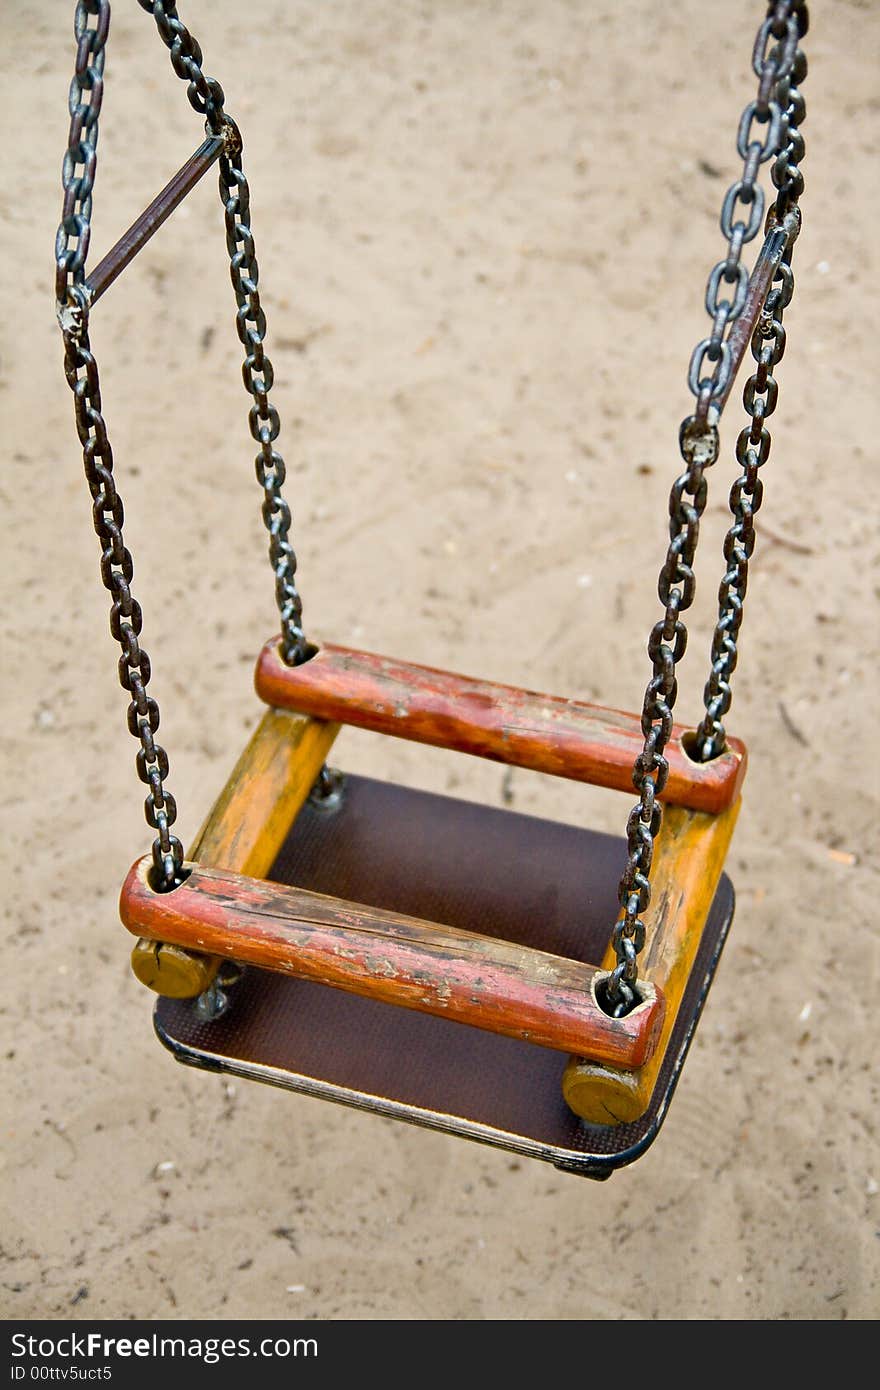 The swing with chains in the park